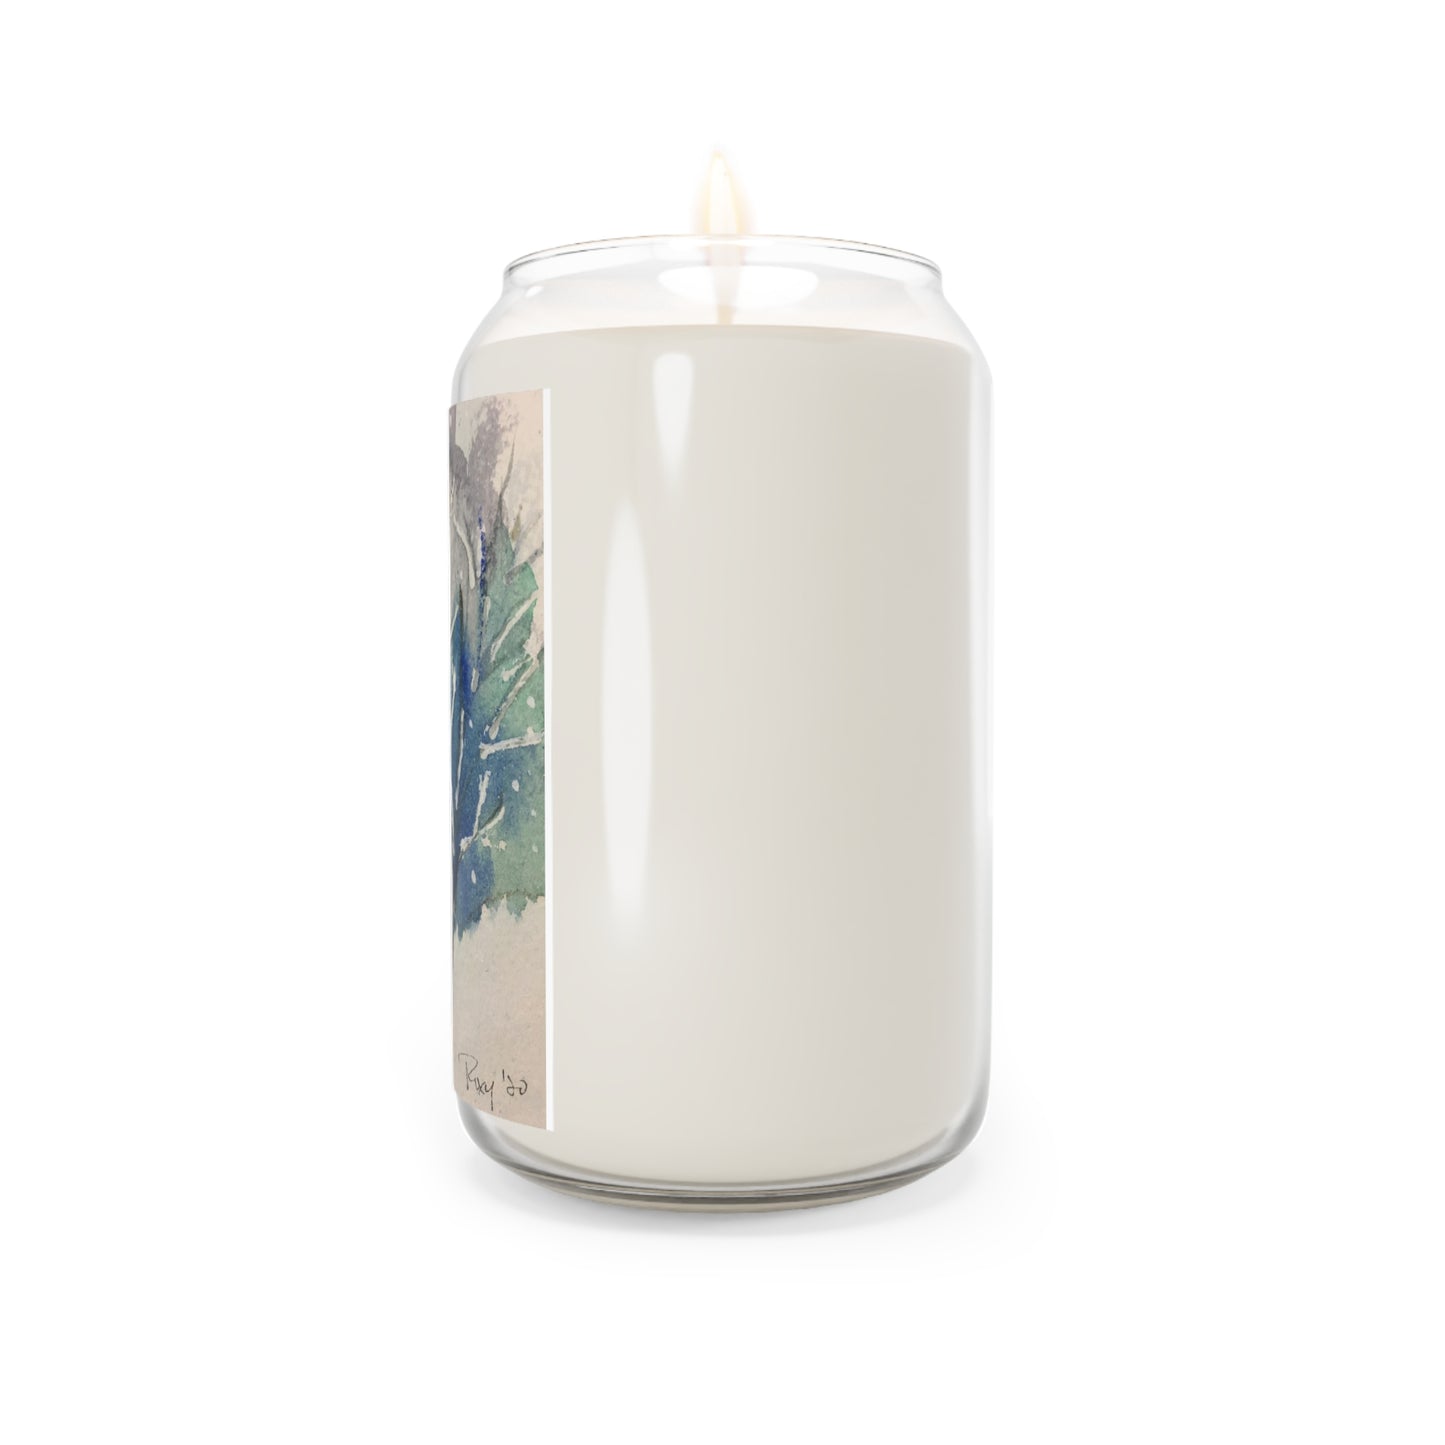 Winter Trees in Watercolor Scented Candle, 13.75oz